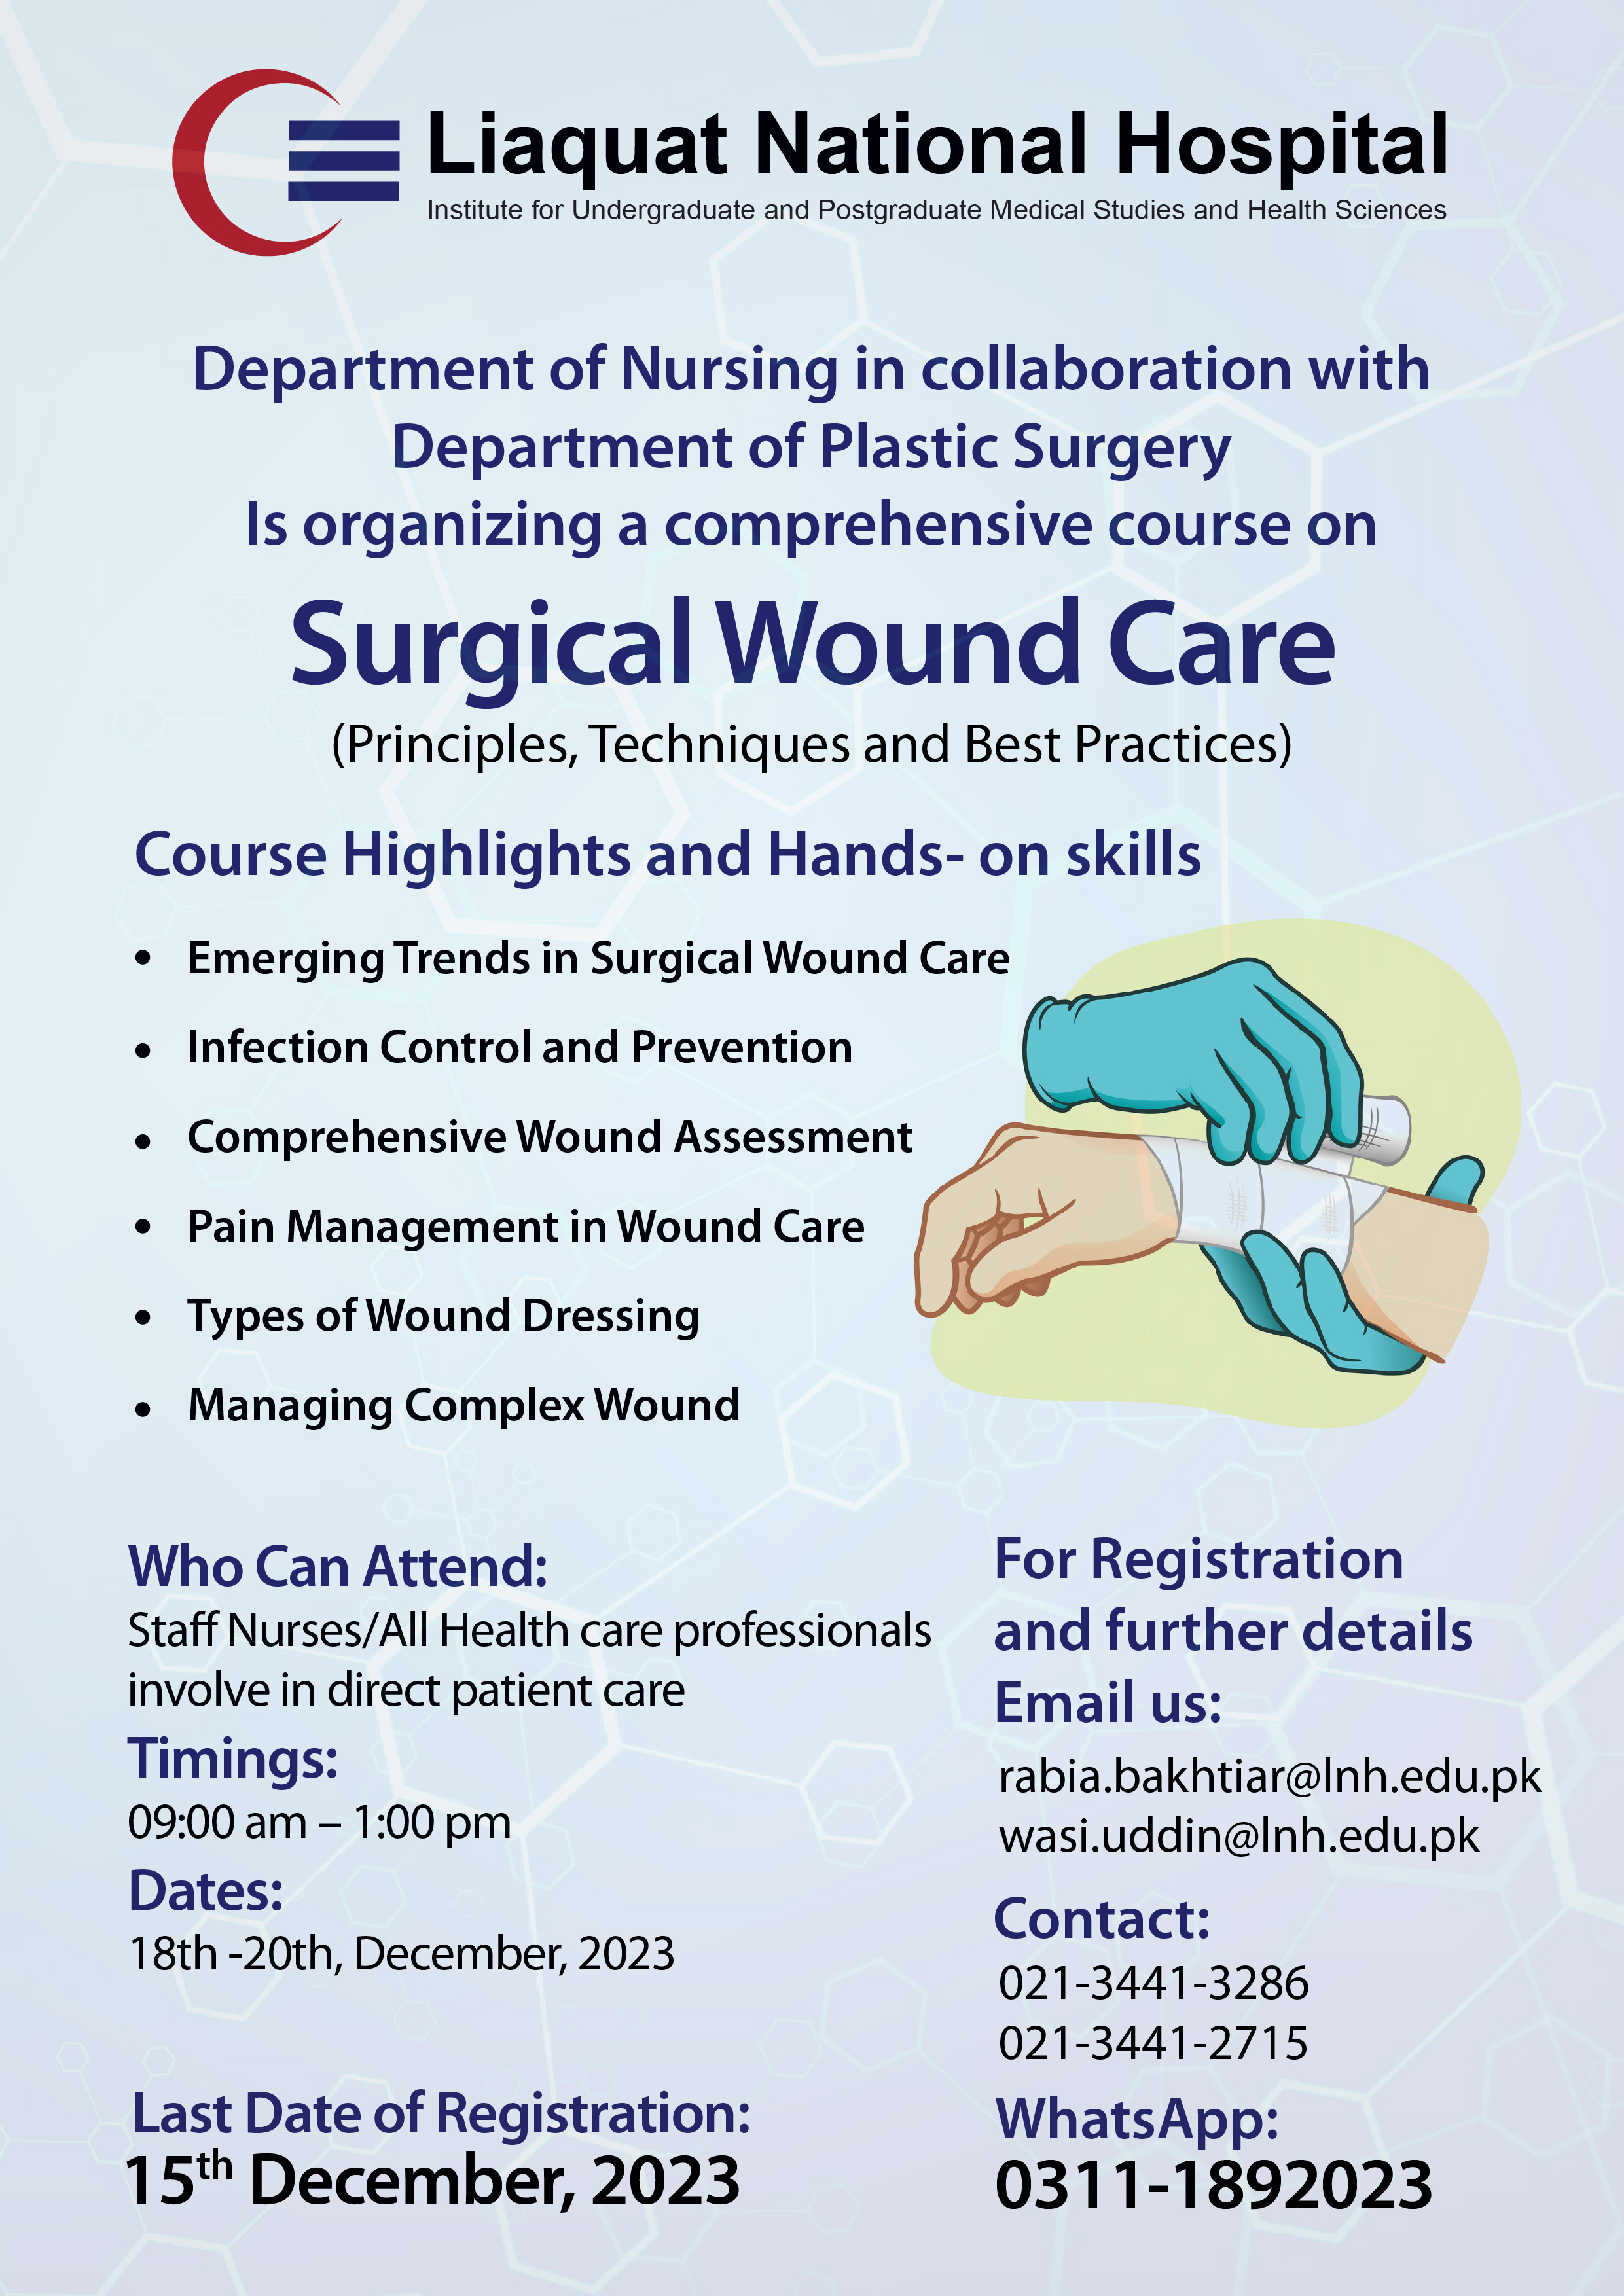 A Comprehensive Course on Surgical Wound Care, Dec 18 – 20, 2023